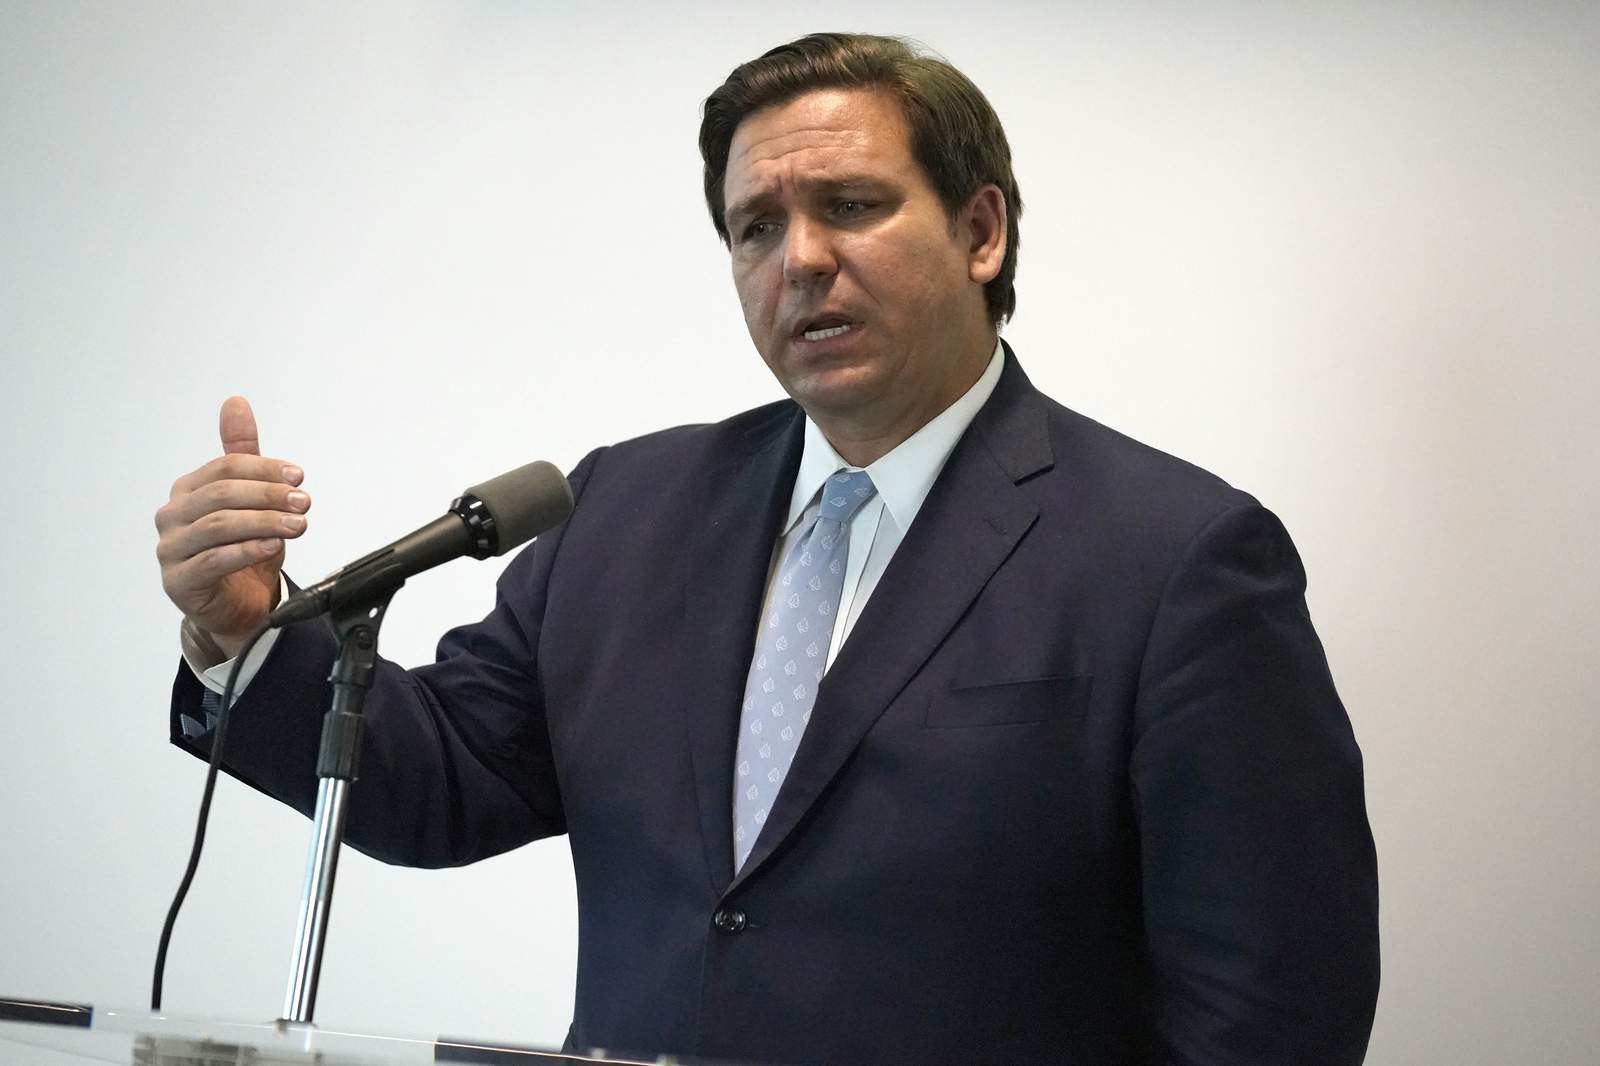 Survey sent to Florida Democrats highlights 10 potential challengers to DeSantis in 2022